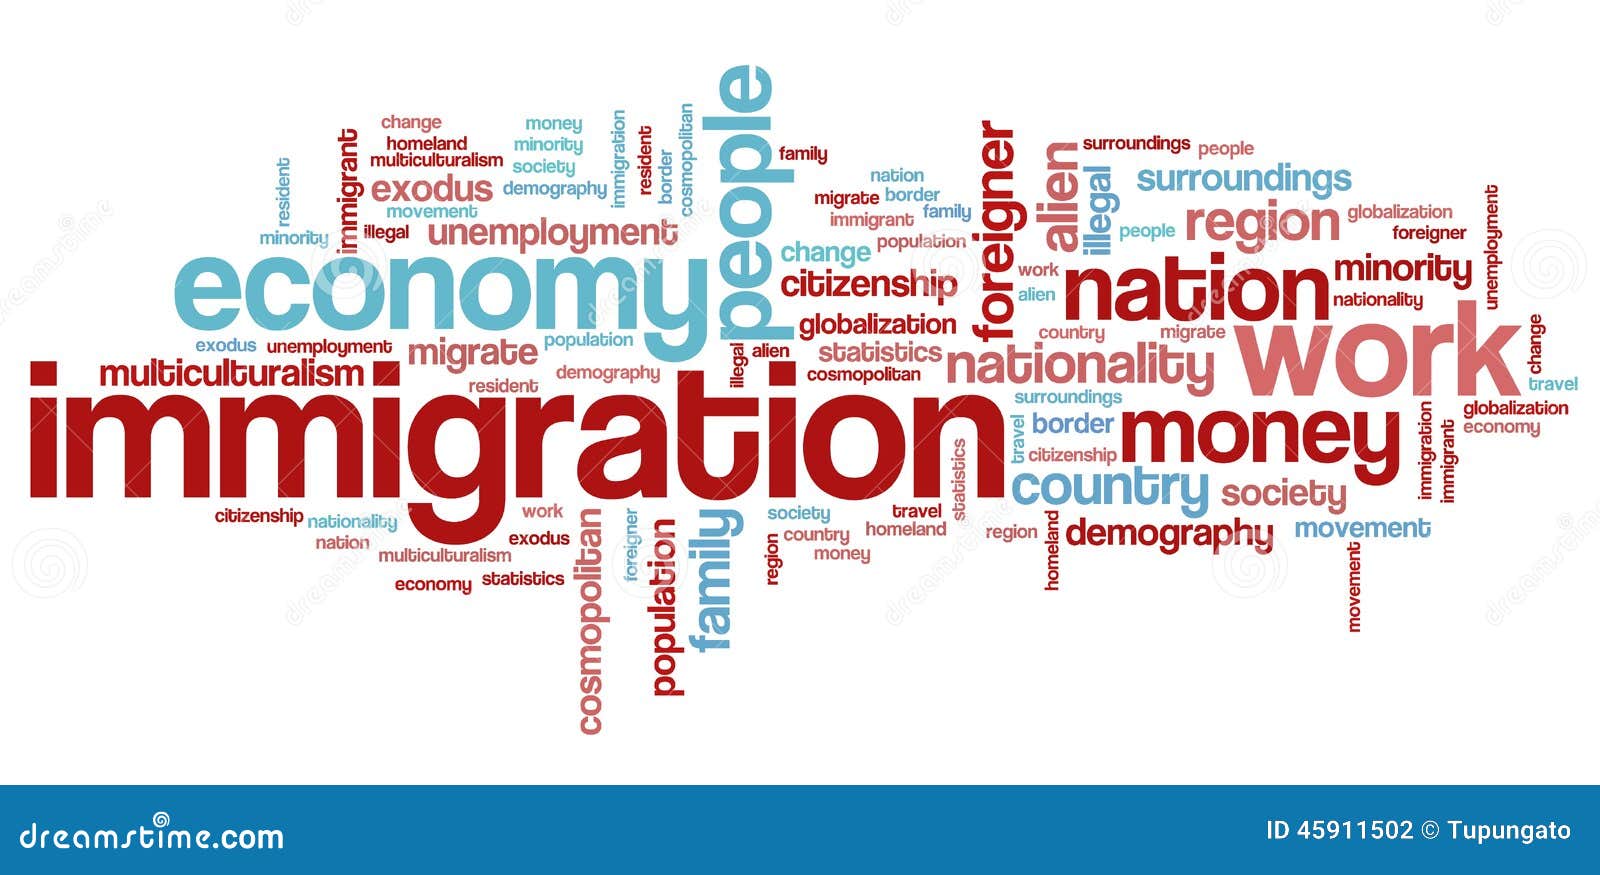 An immigration poster.